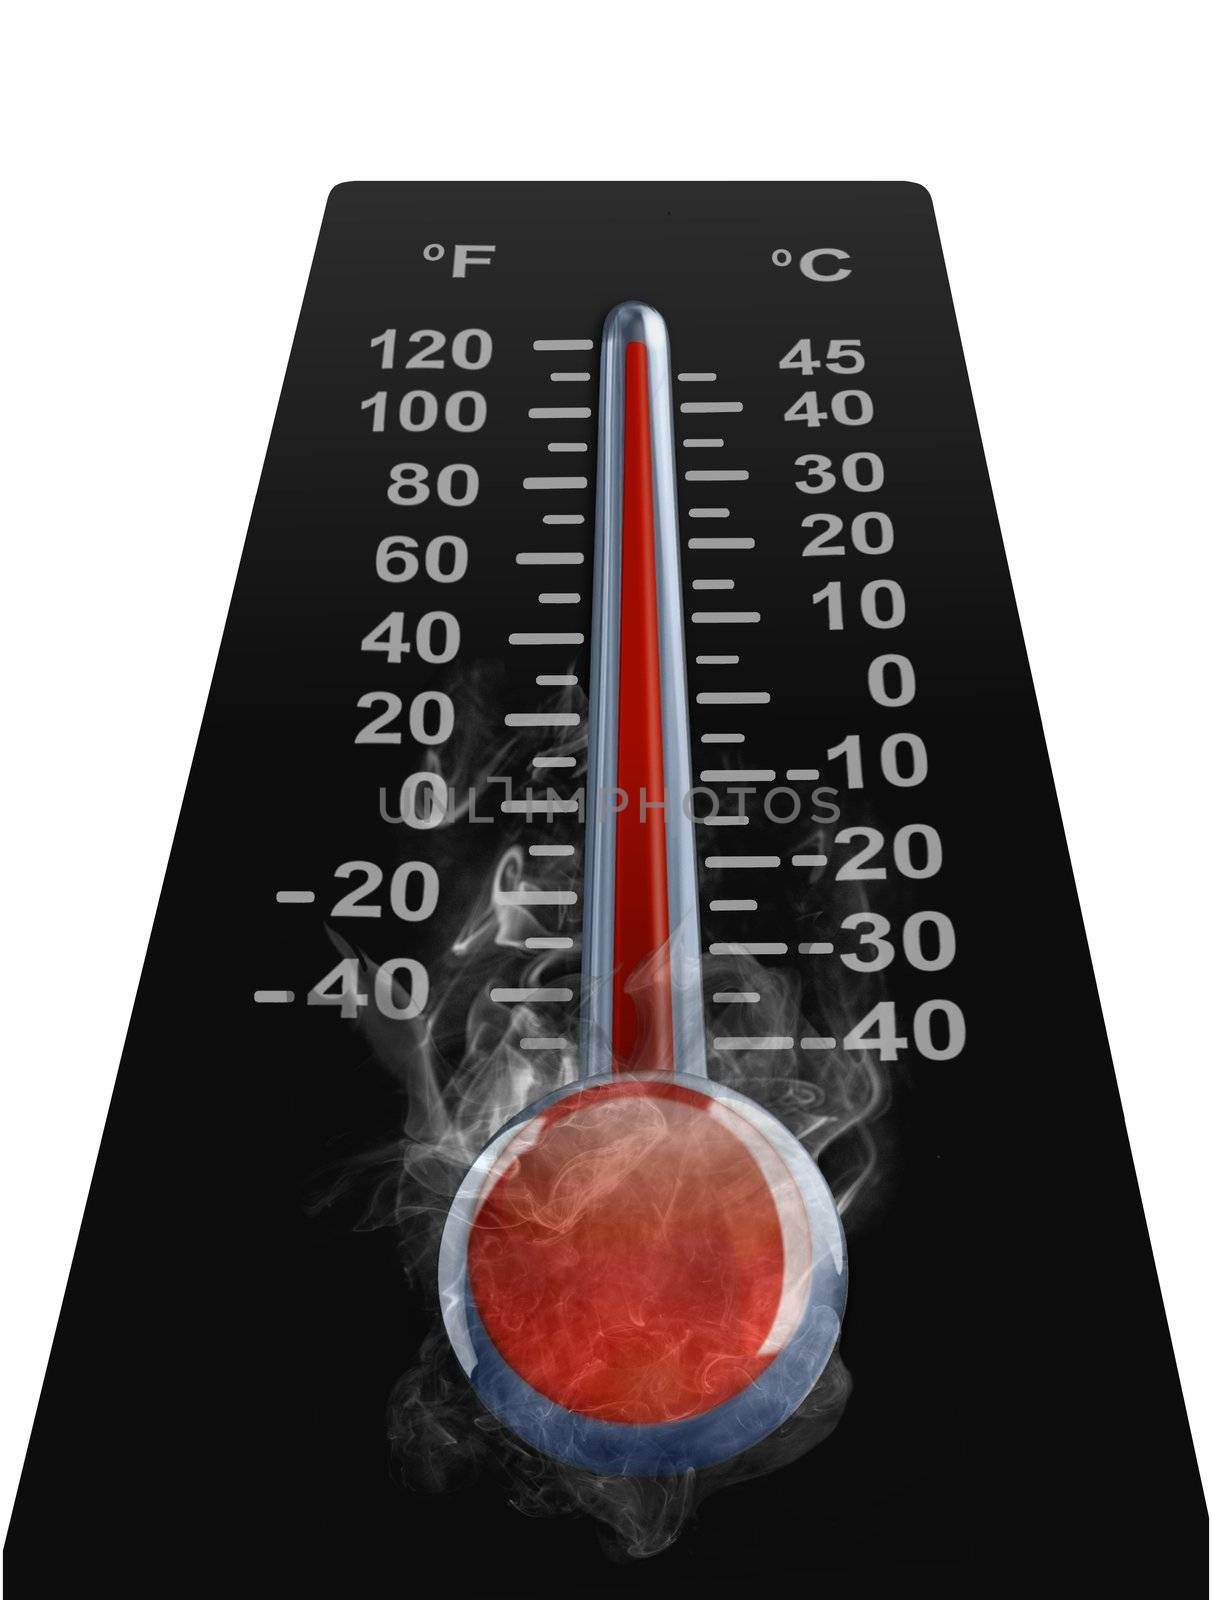 Thermometer with high temperature







Thermometer with high tempreture